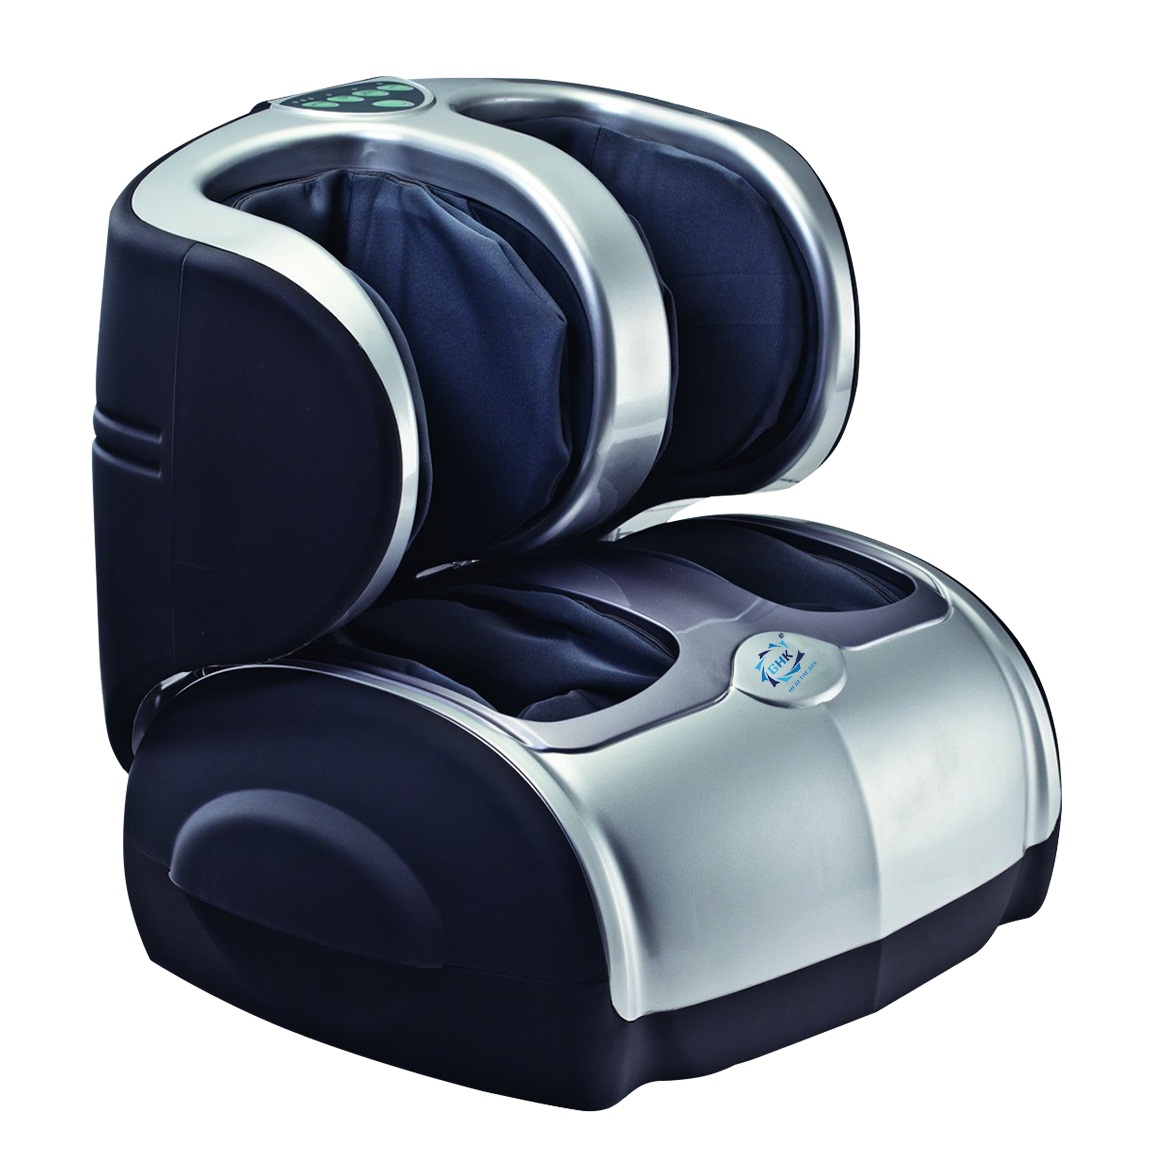 GHK H50 Deluxe Luxurious Leg, Calf and Foot Massager with Height Adjustable